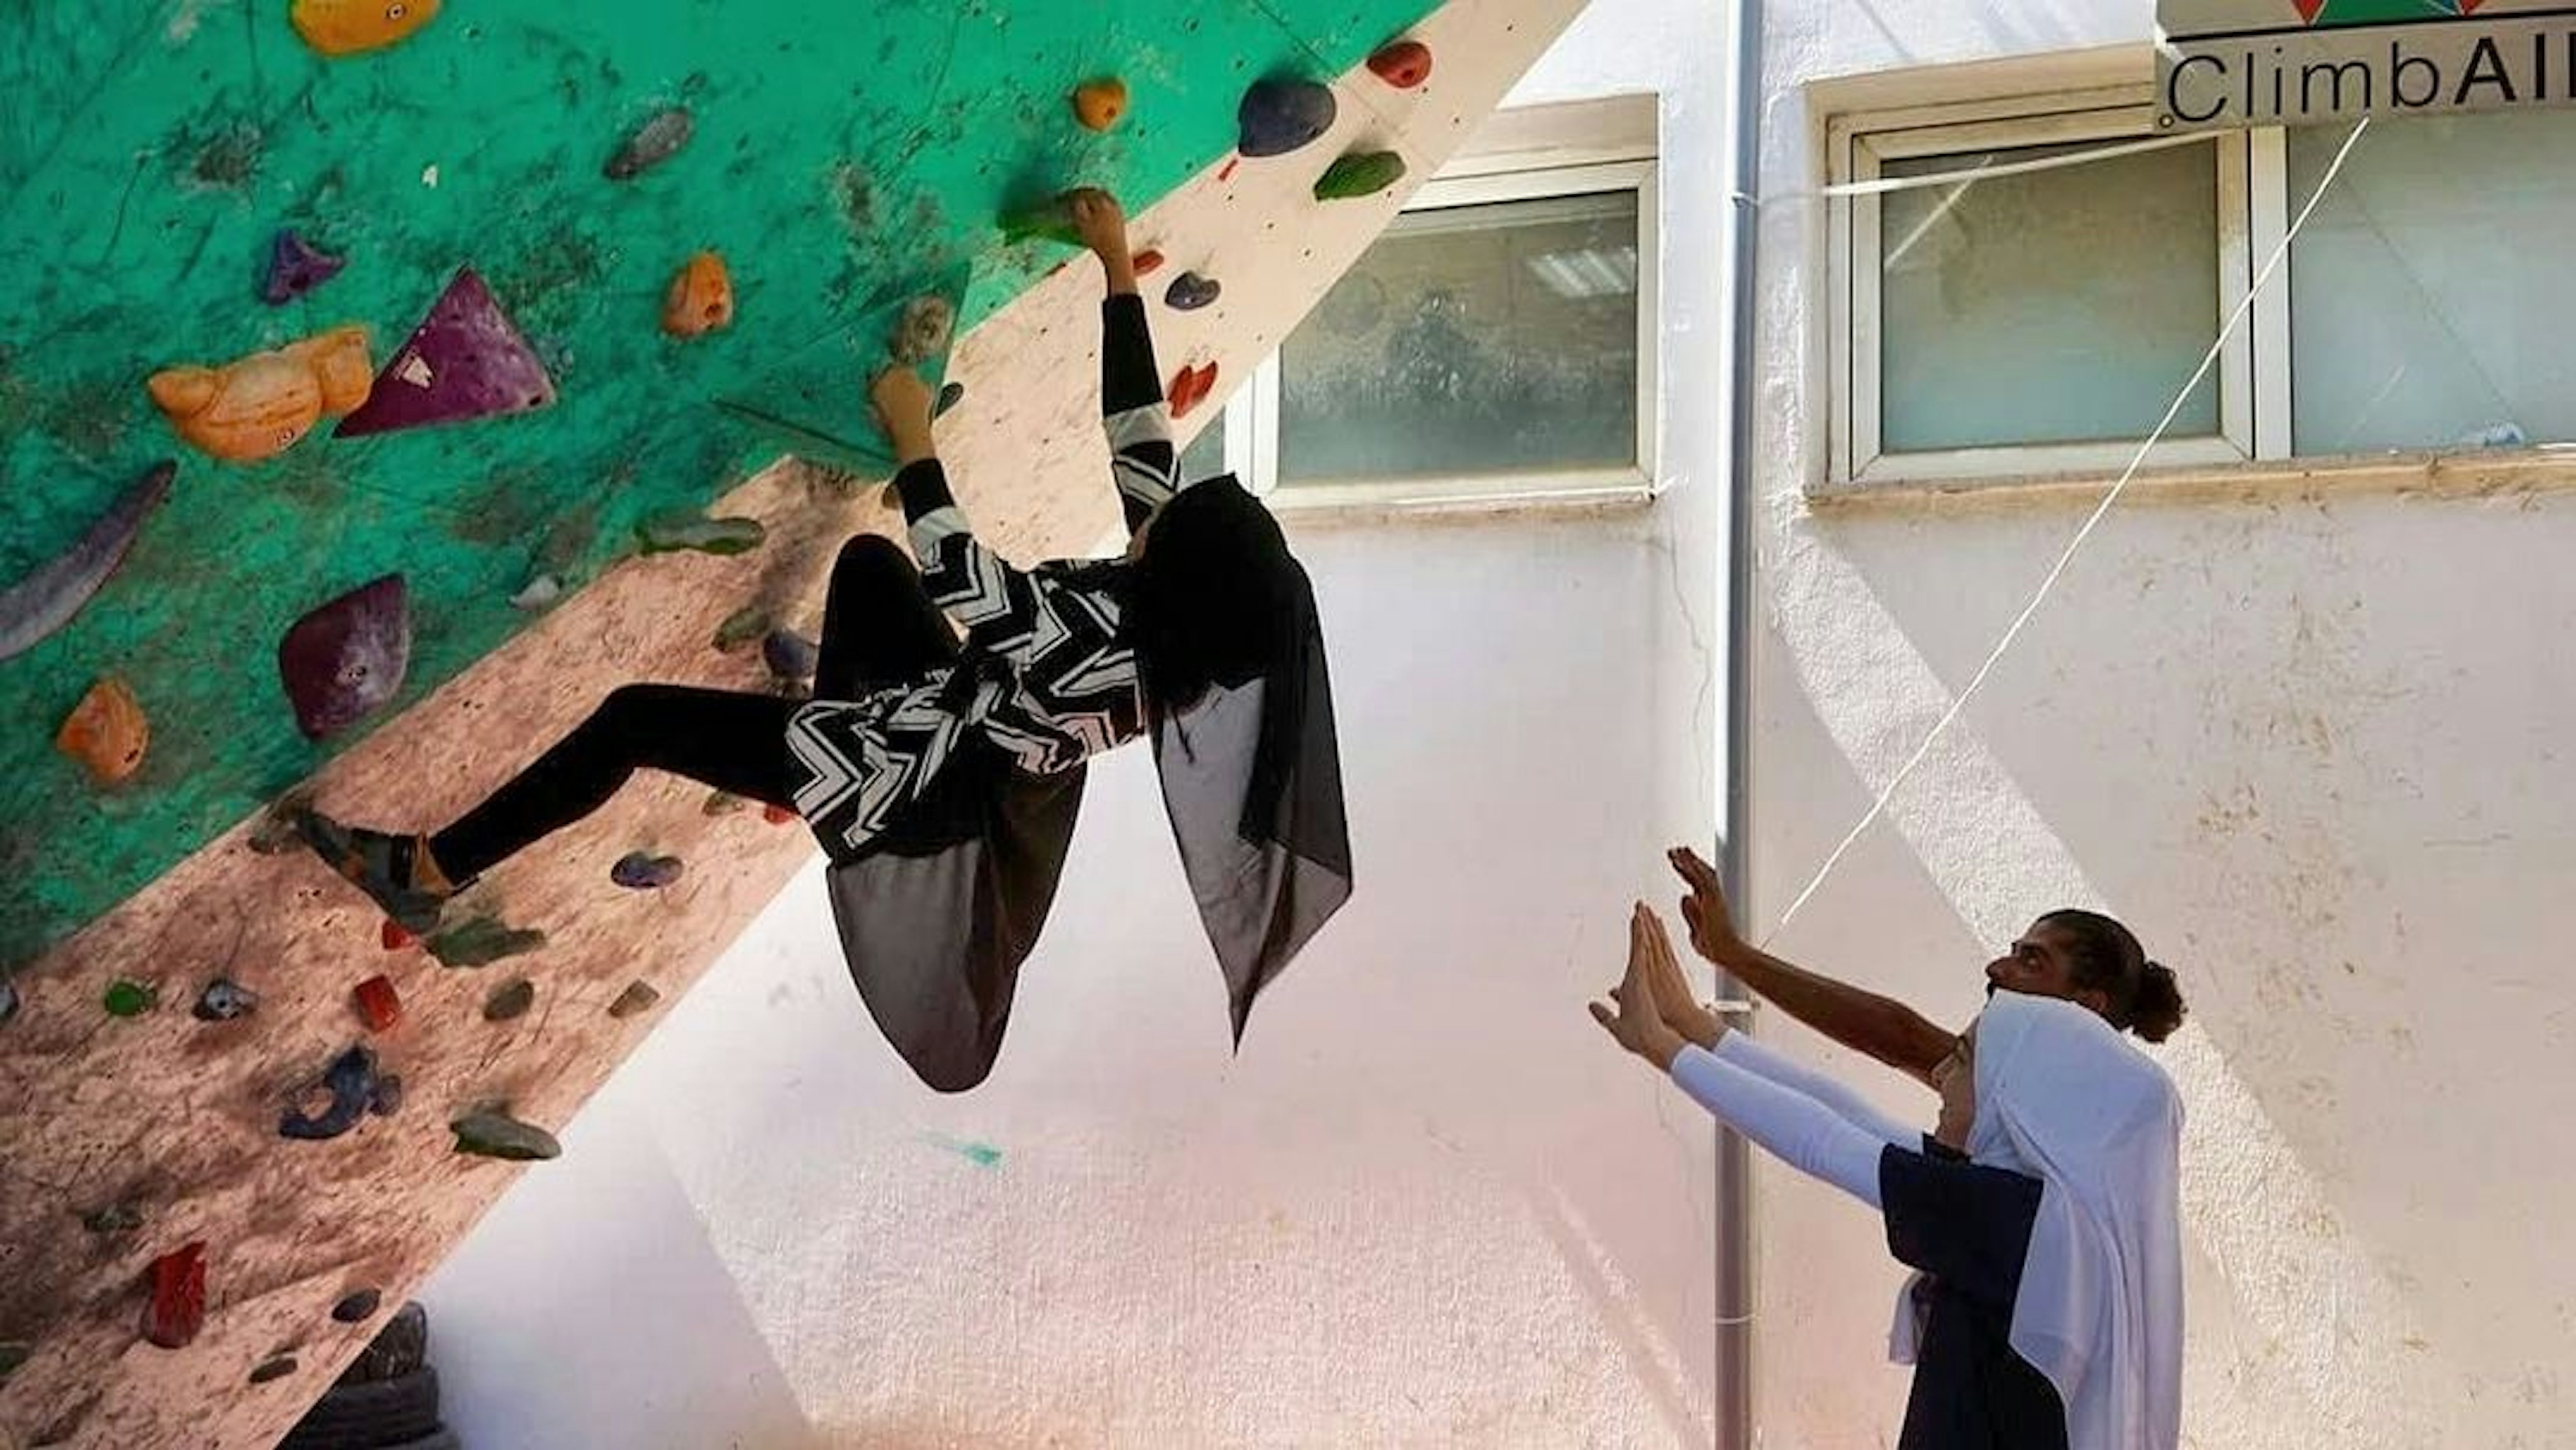 A person bouldering on a bouldering wall